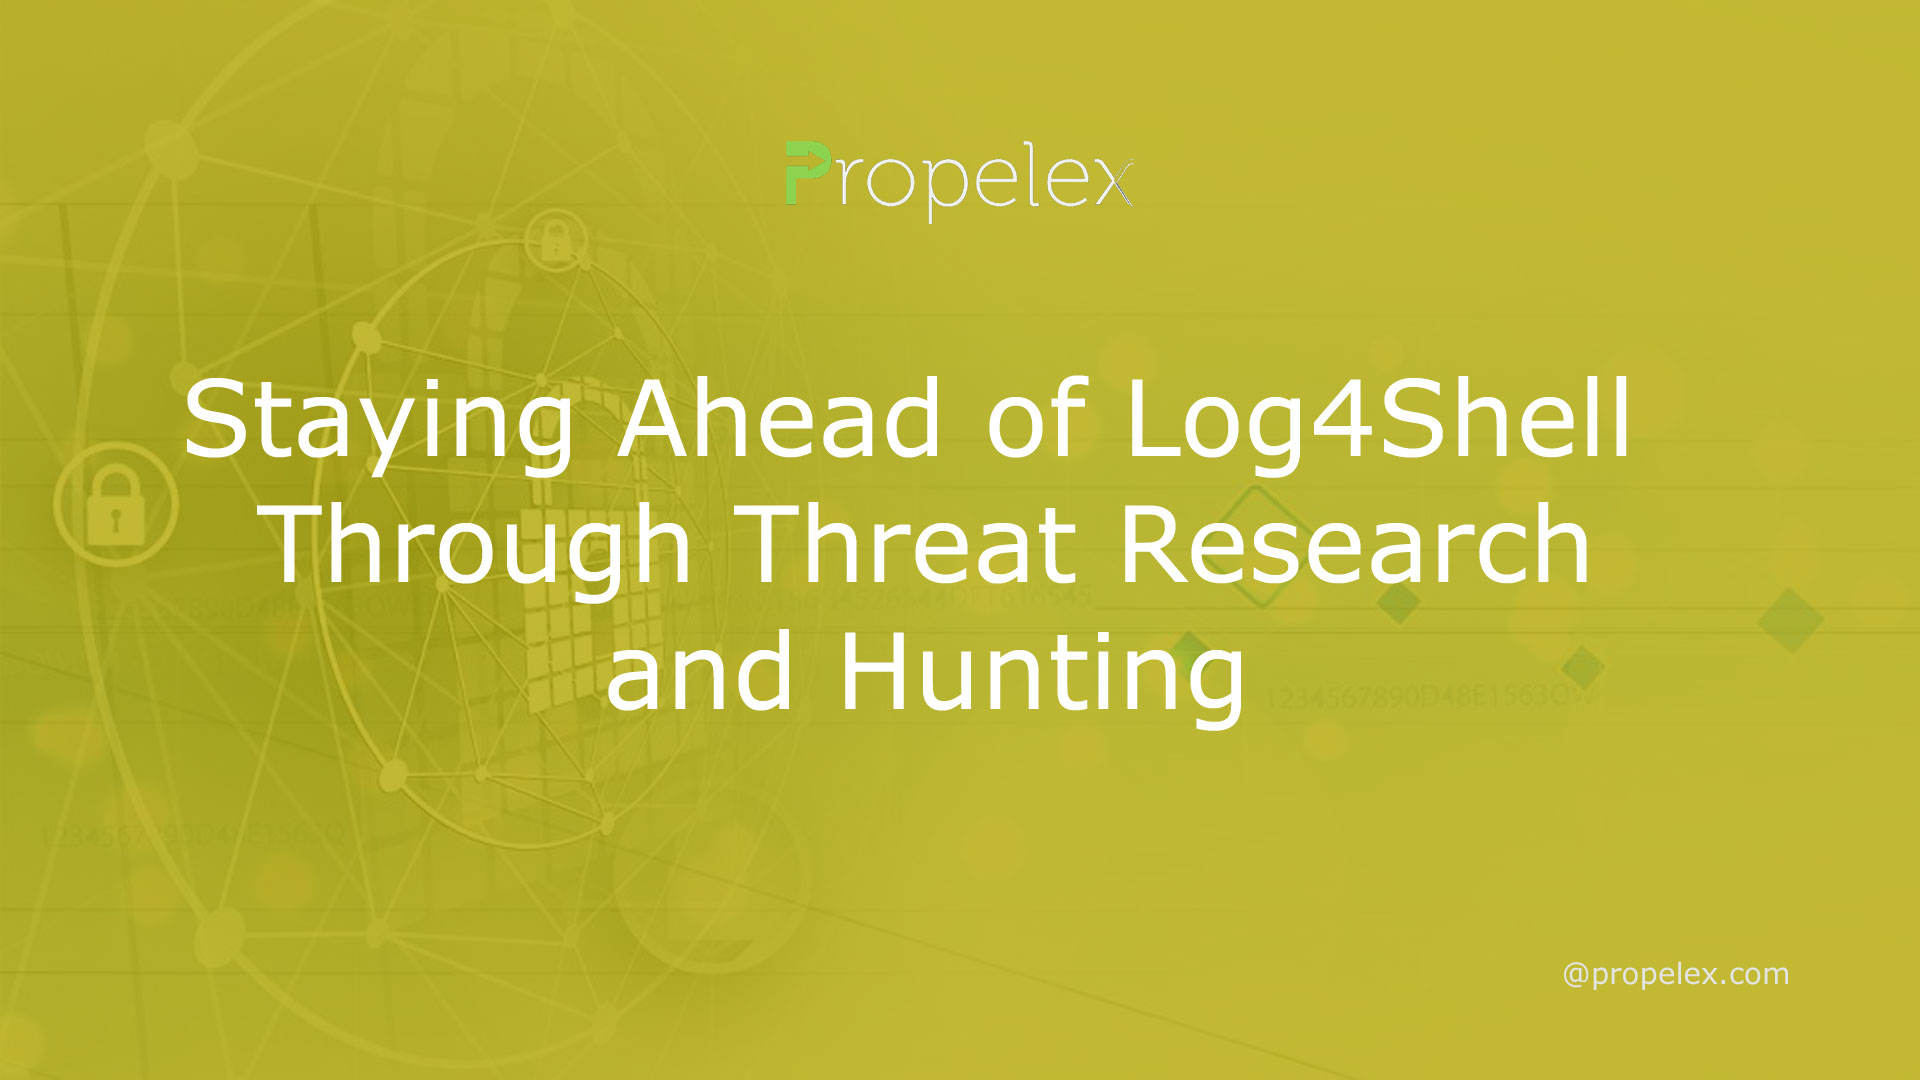 Staying Ahead of Log4Shell Through Threat Research and Hunting